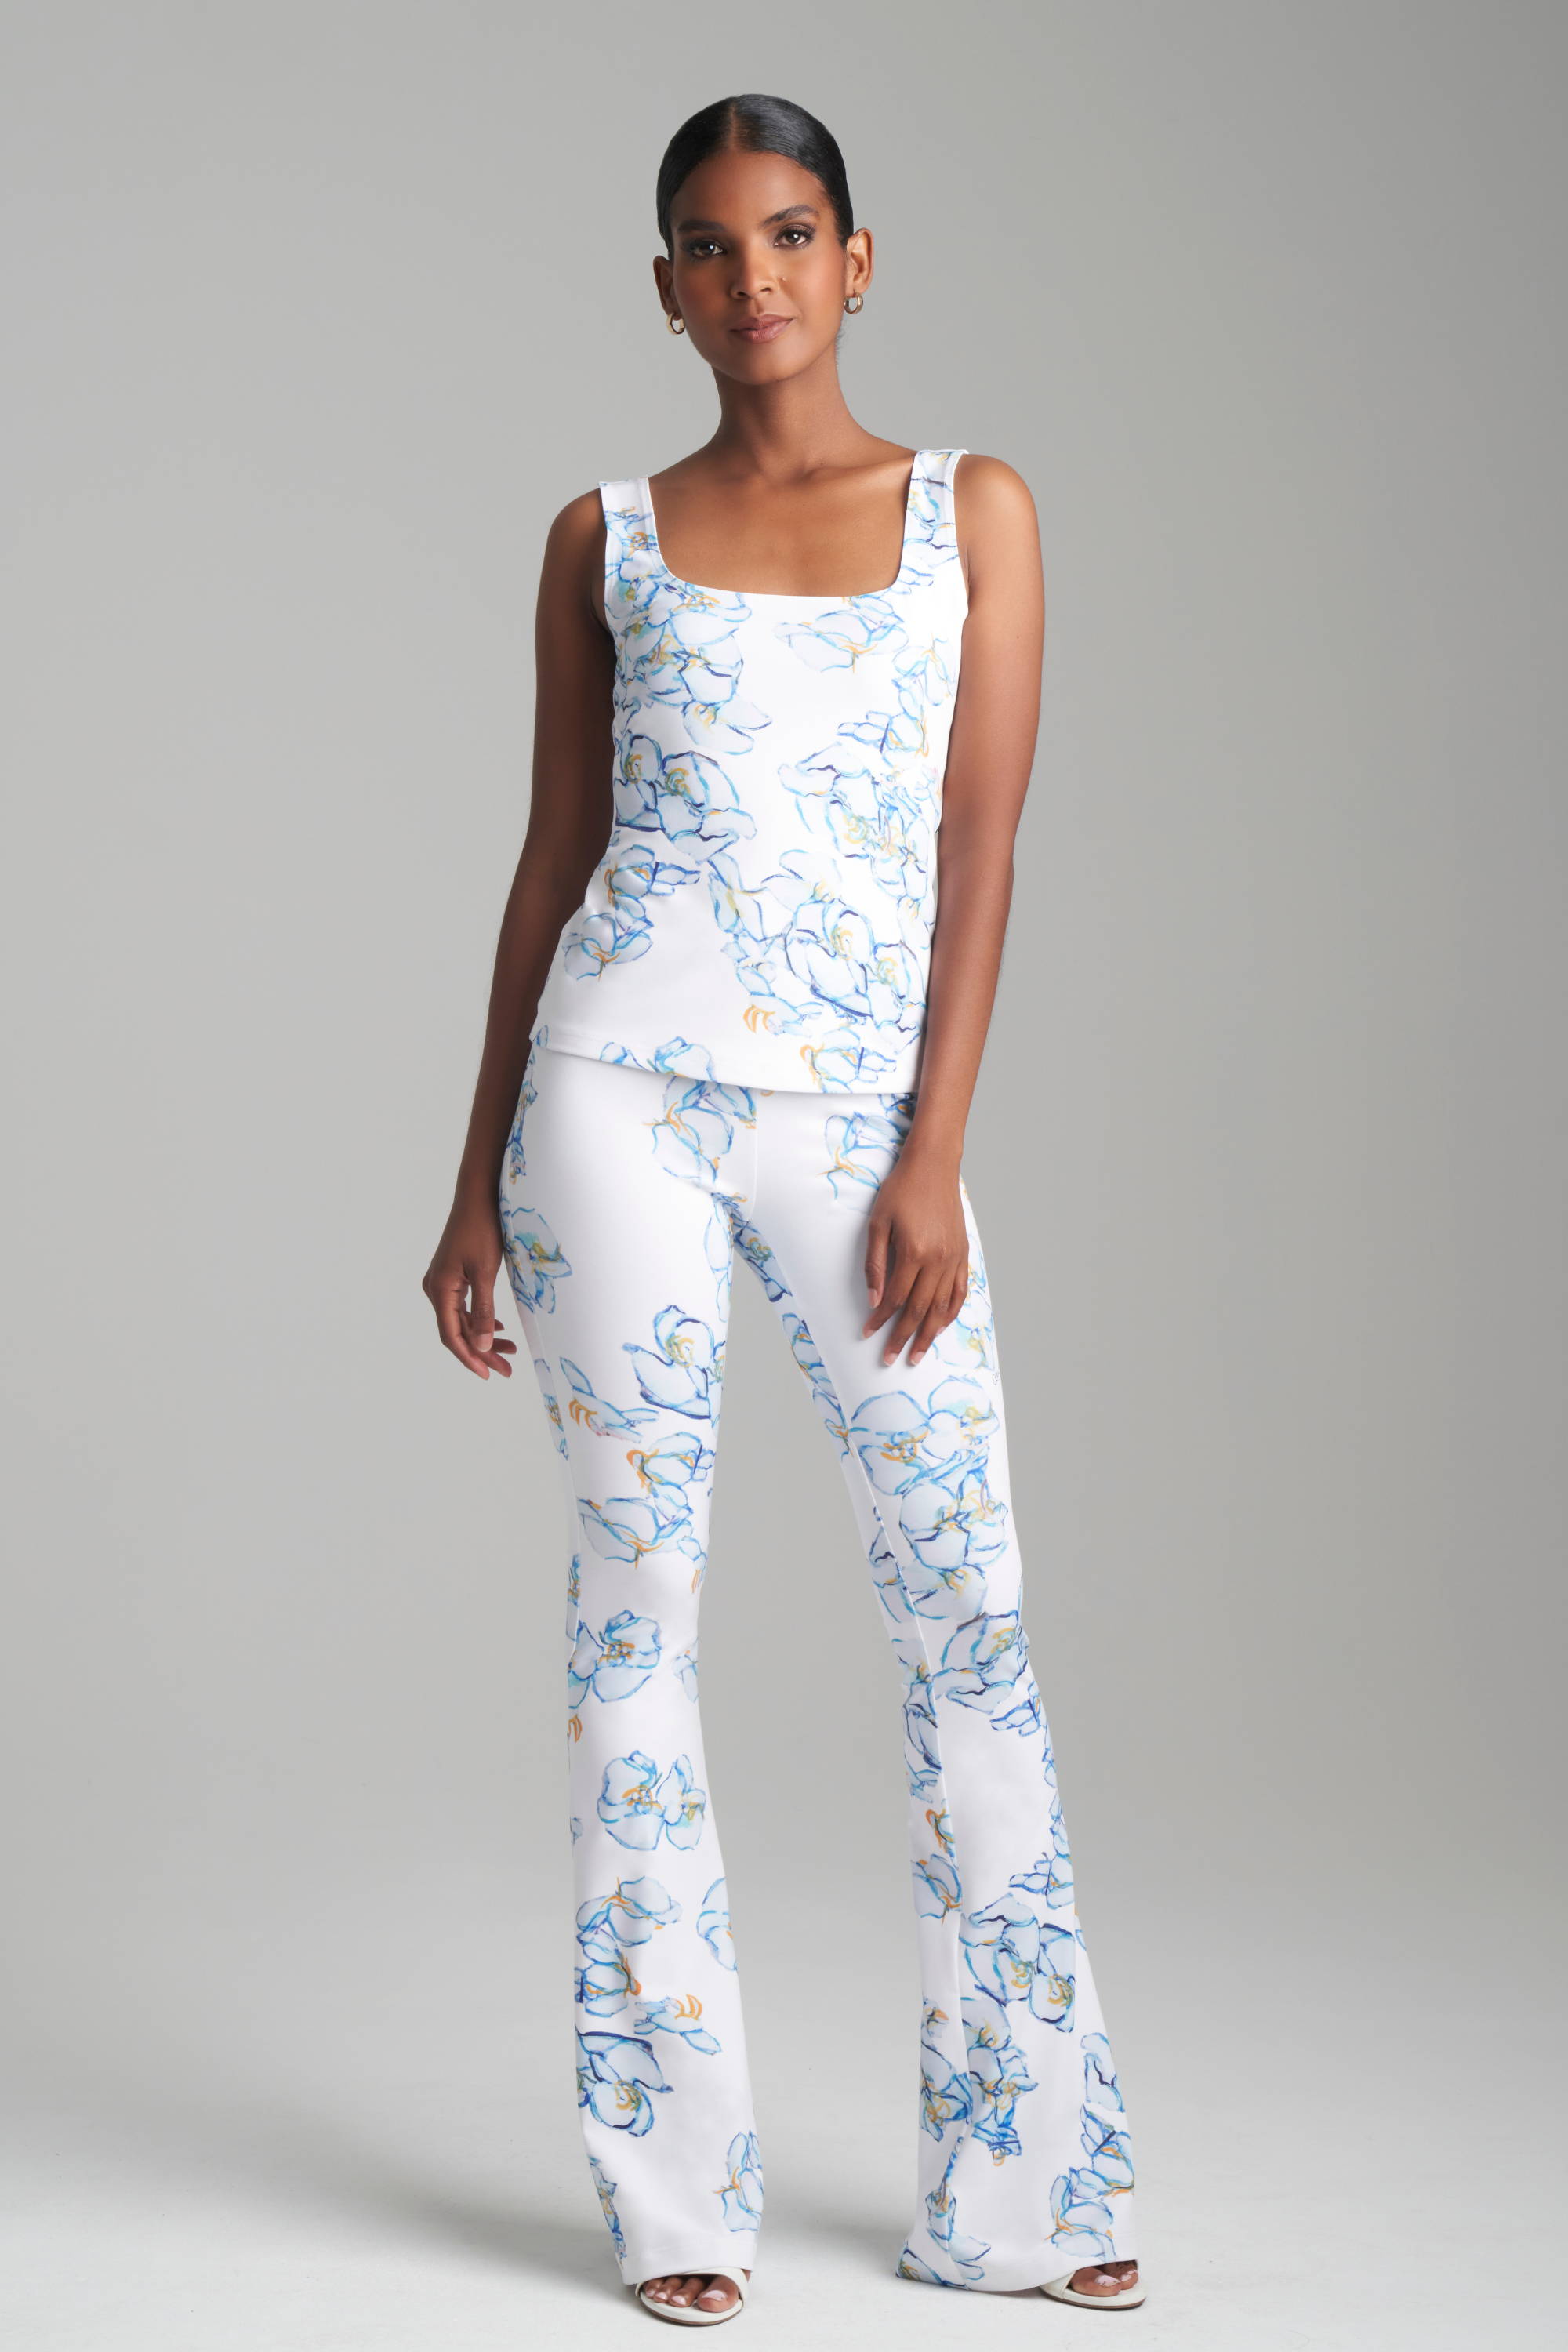 Woman wearing matching floral printed tank top and pants by Ala von Auersperg for spring 2024